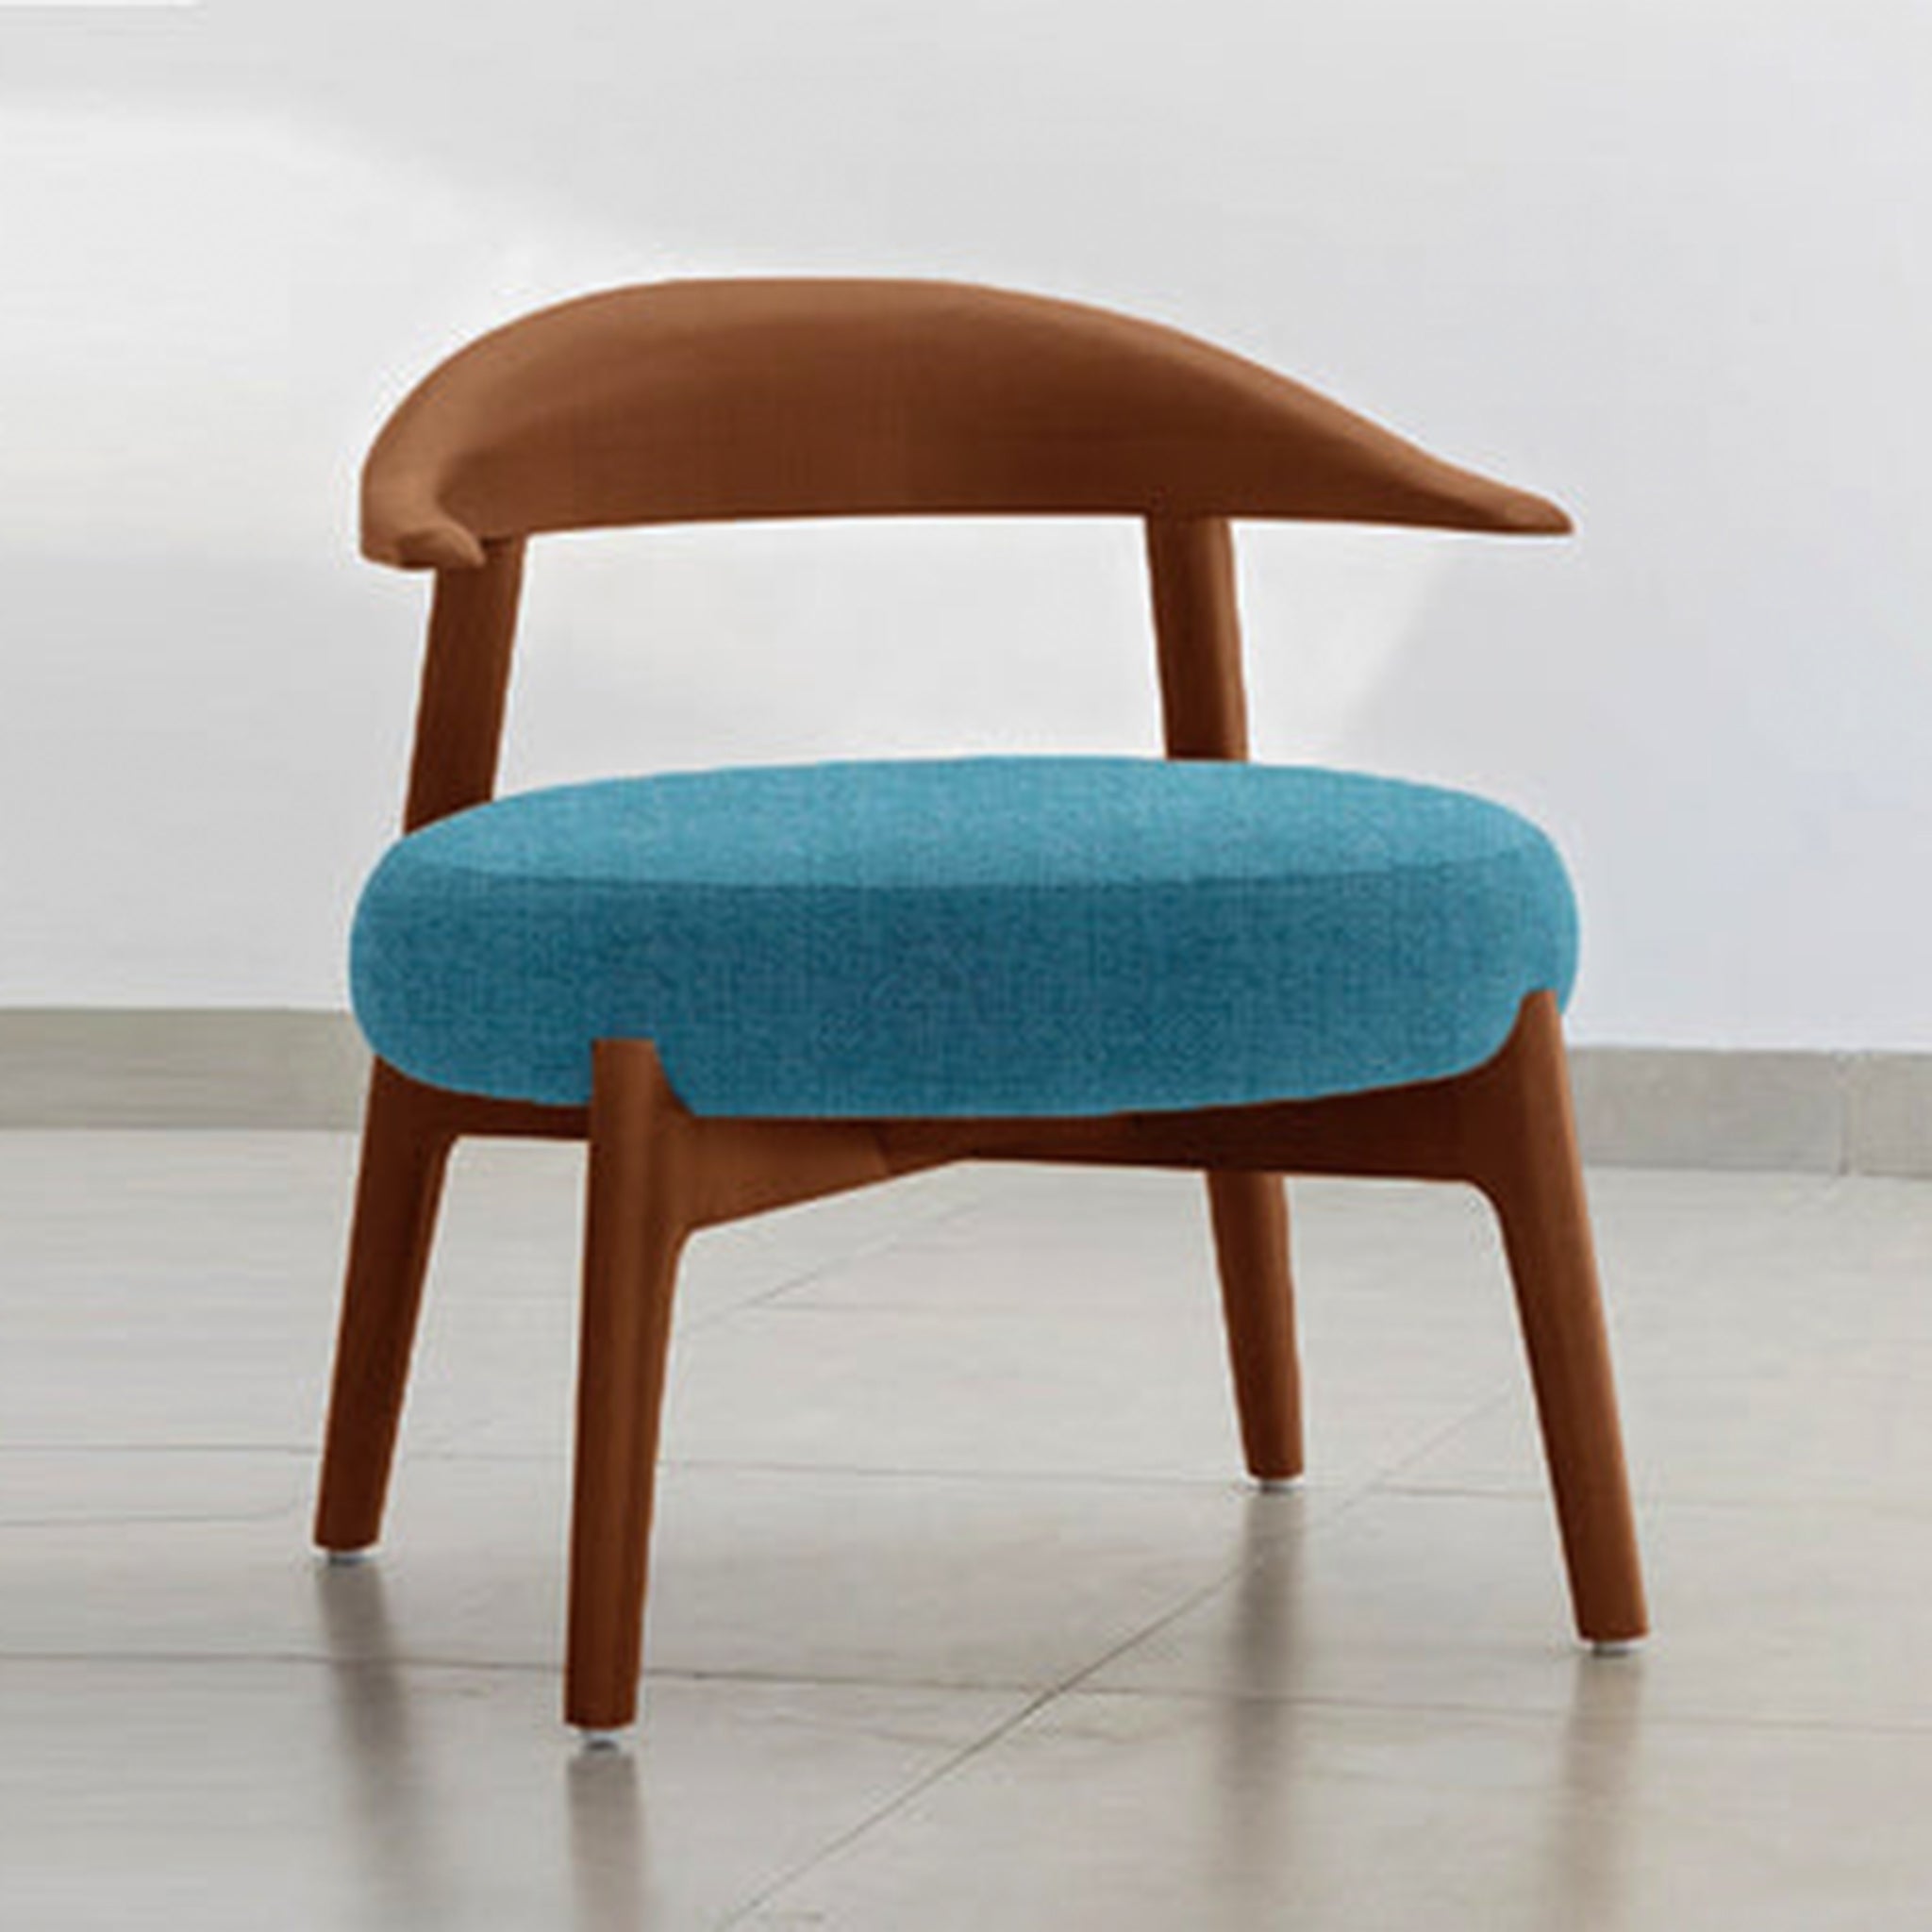 "The Hyde Accent Chair with unique wooden curves and cushioned seat"